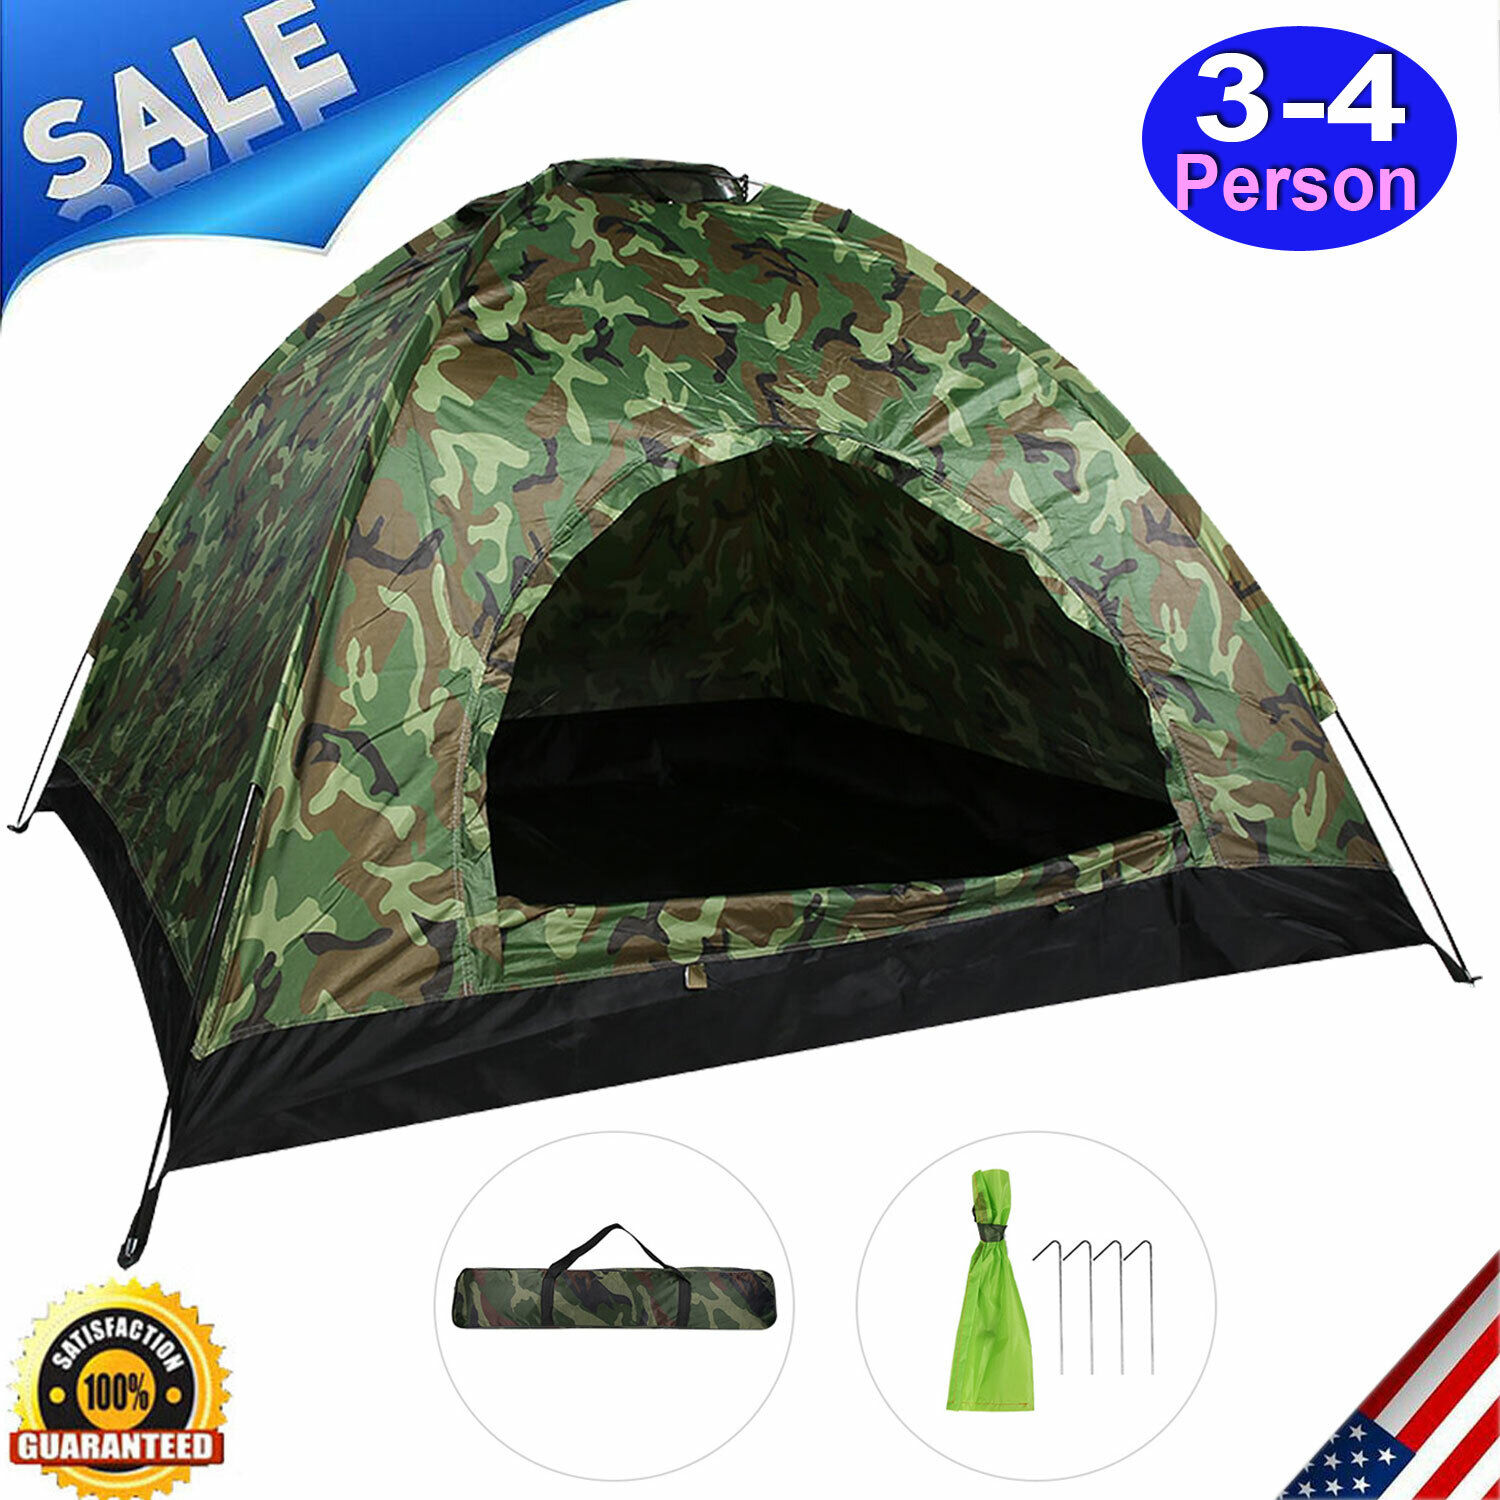 3-4 Person Outdoor Camping Family Tent Protection Attention brand Camoufl Hiking Kansas City Mall